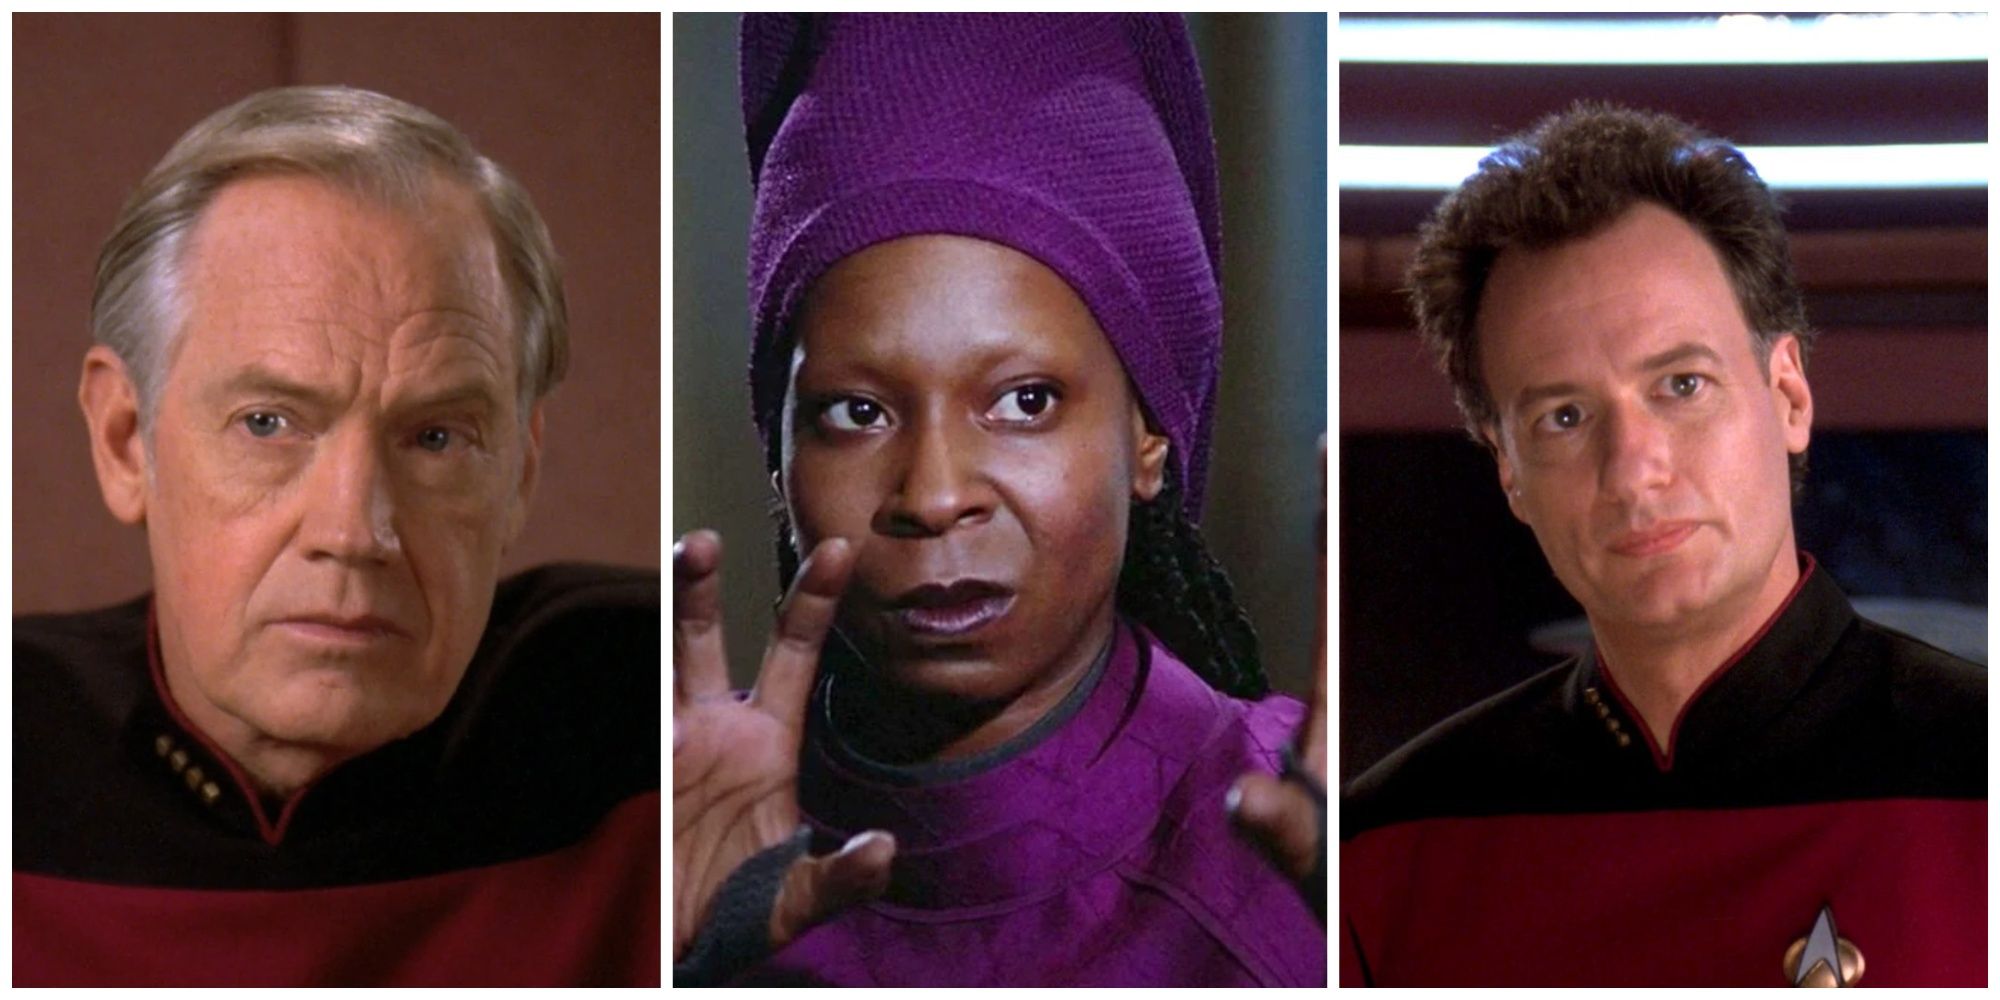 A collage showing Captain Jellico, Guinan, and Q.